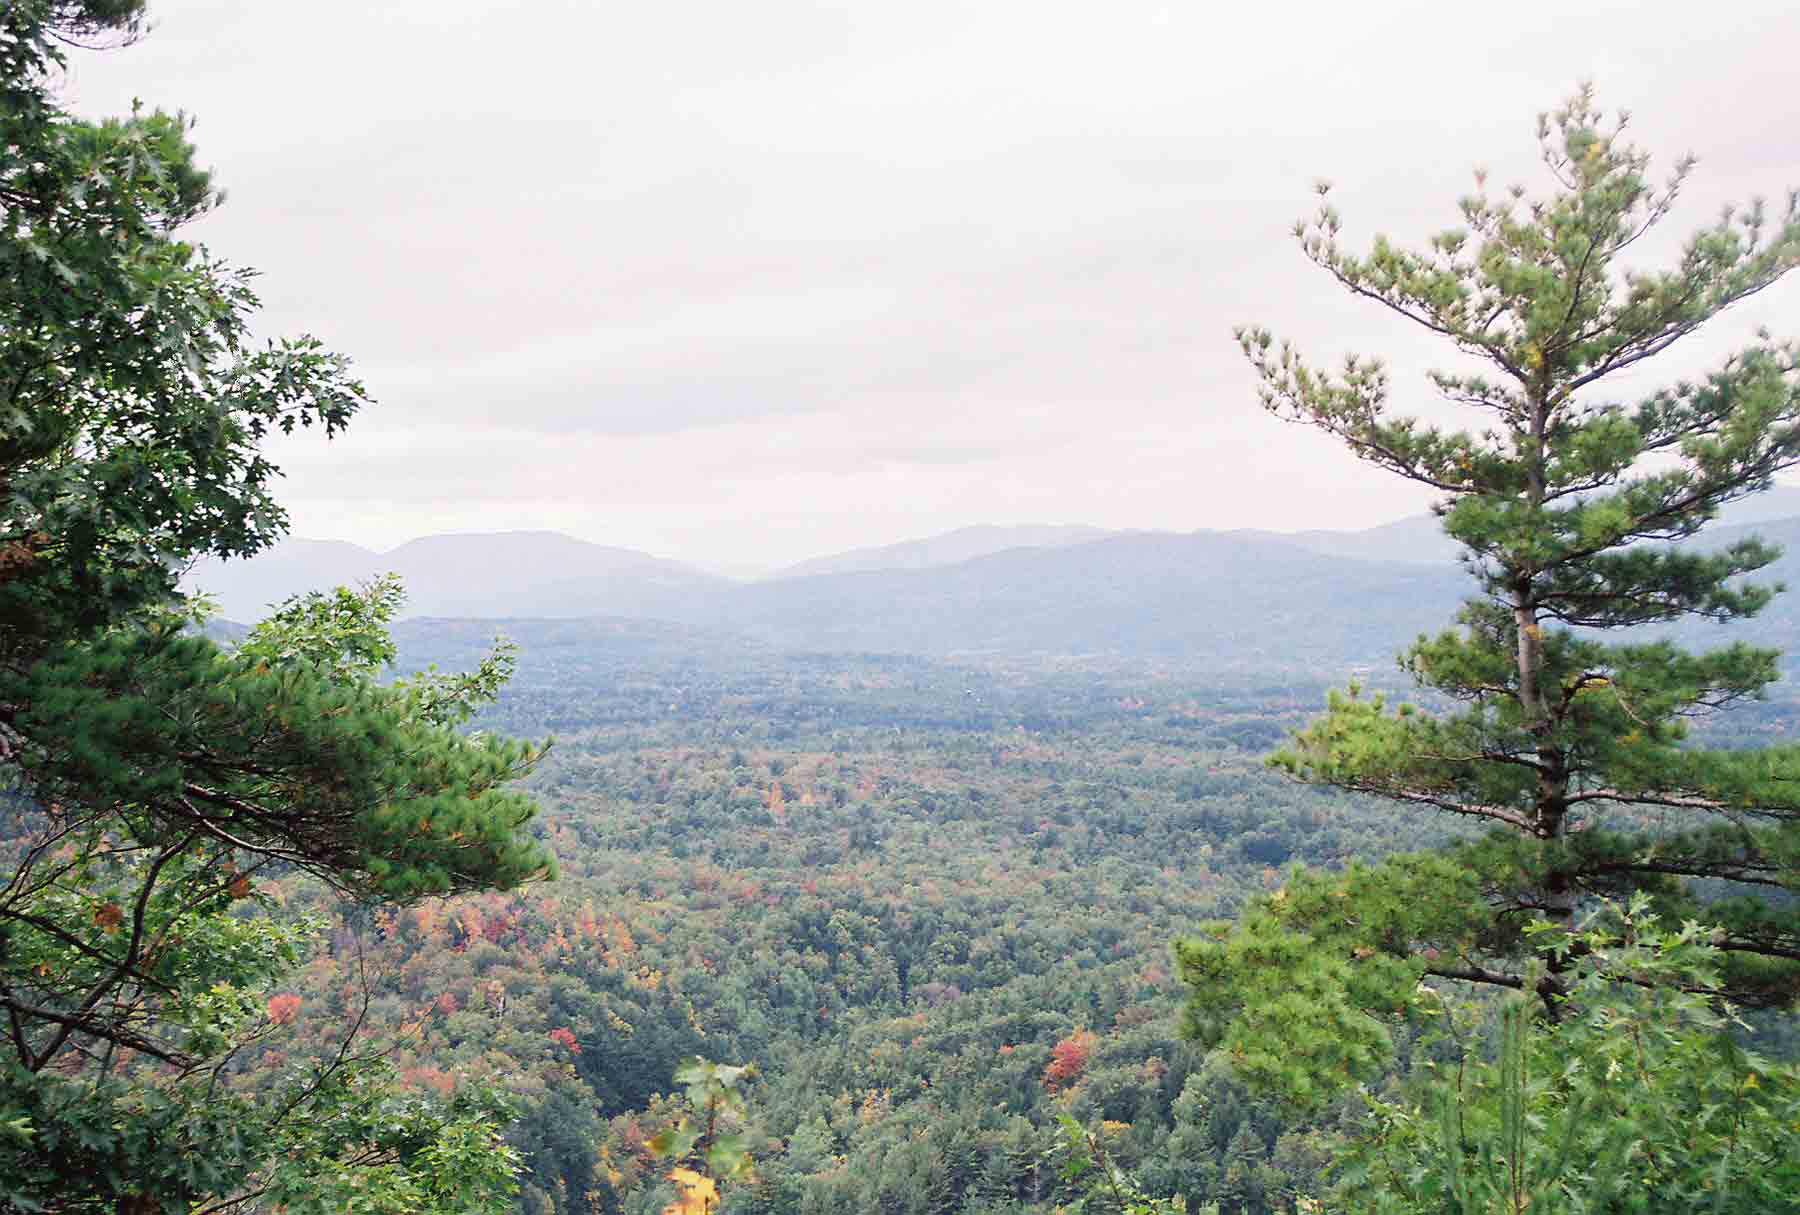 mm 17.0 - Another view from Clarendon Lookout.  Courtesy dlcul@conncoll.edu